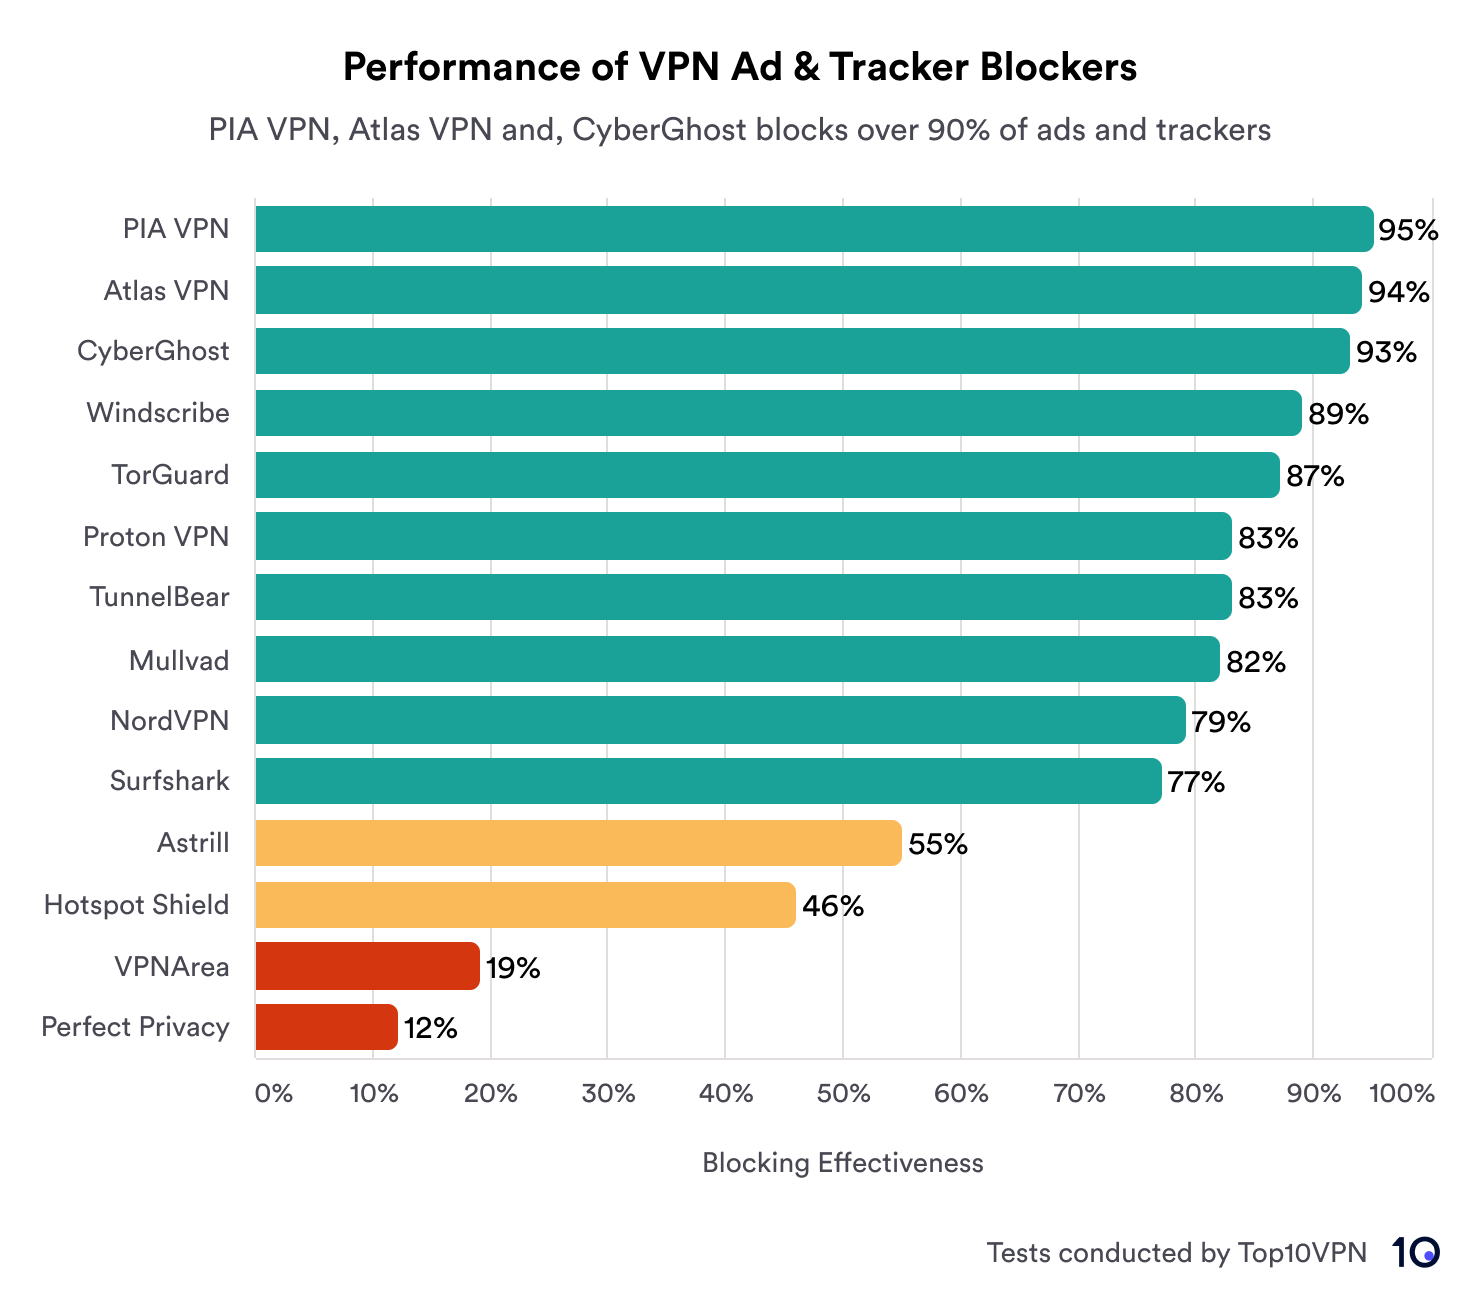 Bar chart showing various VPNs blocking effectiveness of ads and tackers. The top performing VPNs are as follows: PIA VPN at 95%, AtlasVPN at 94%, CyberGhost at 93%, followed by others with lower percentages. Hotspot Shield, VPNArea, and Perfect Privacy are the least effective with 46%, 19%, and 12% respectively